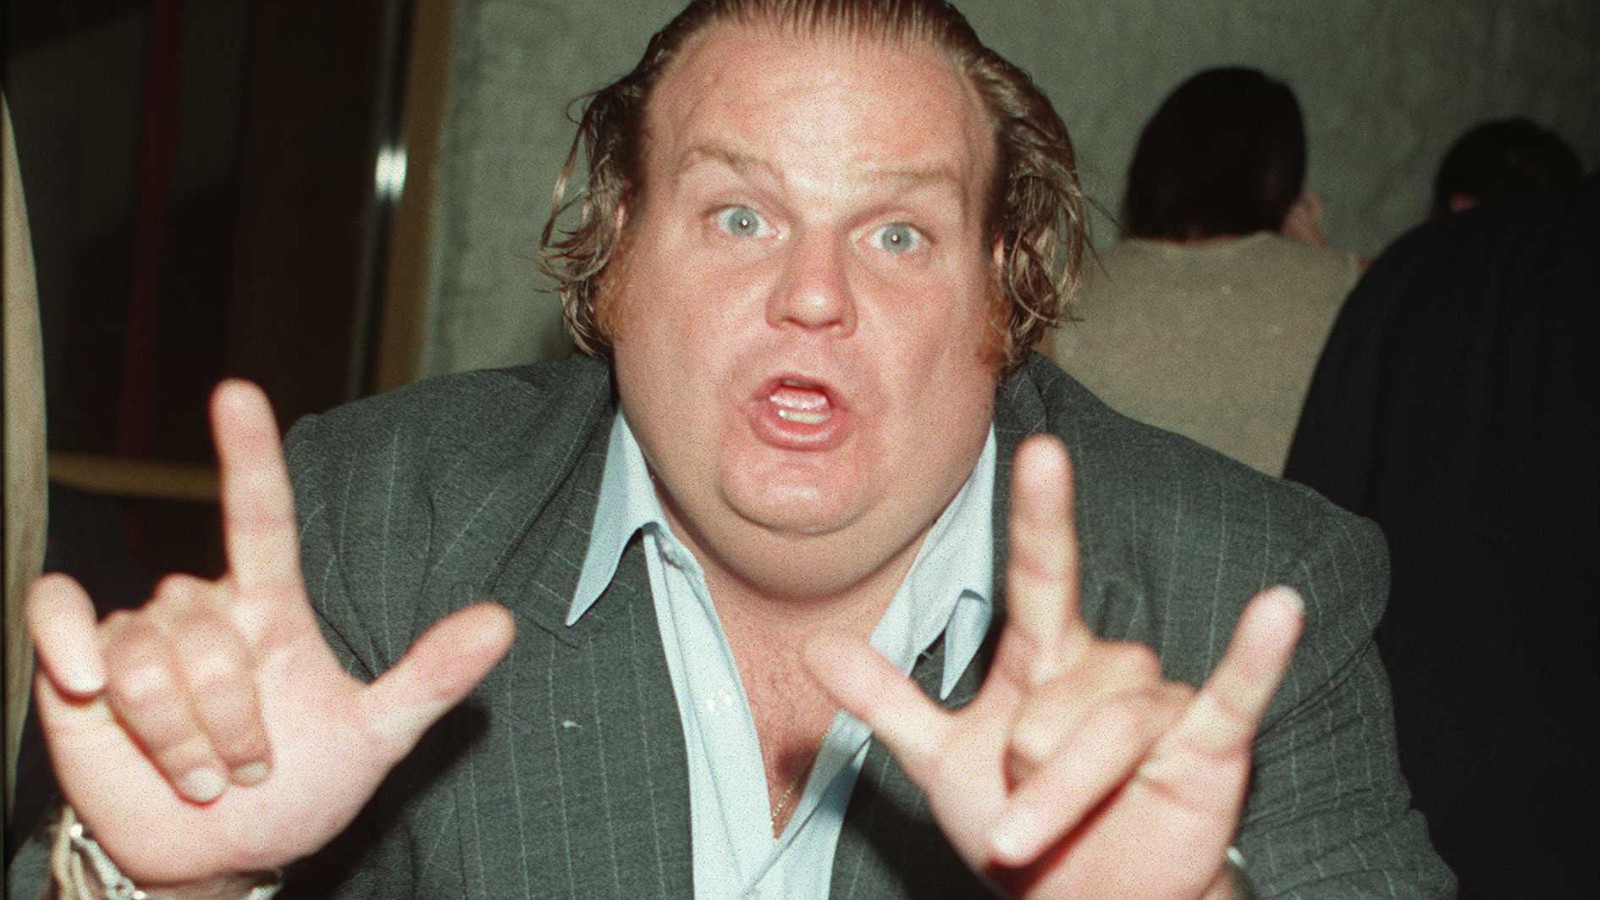 Arts and entertainment, Celebrities, Chris Farley, Movies, entertainment, H...